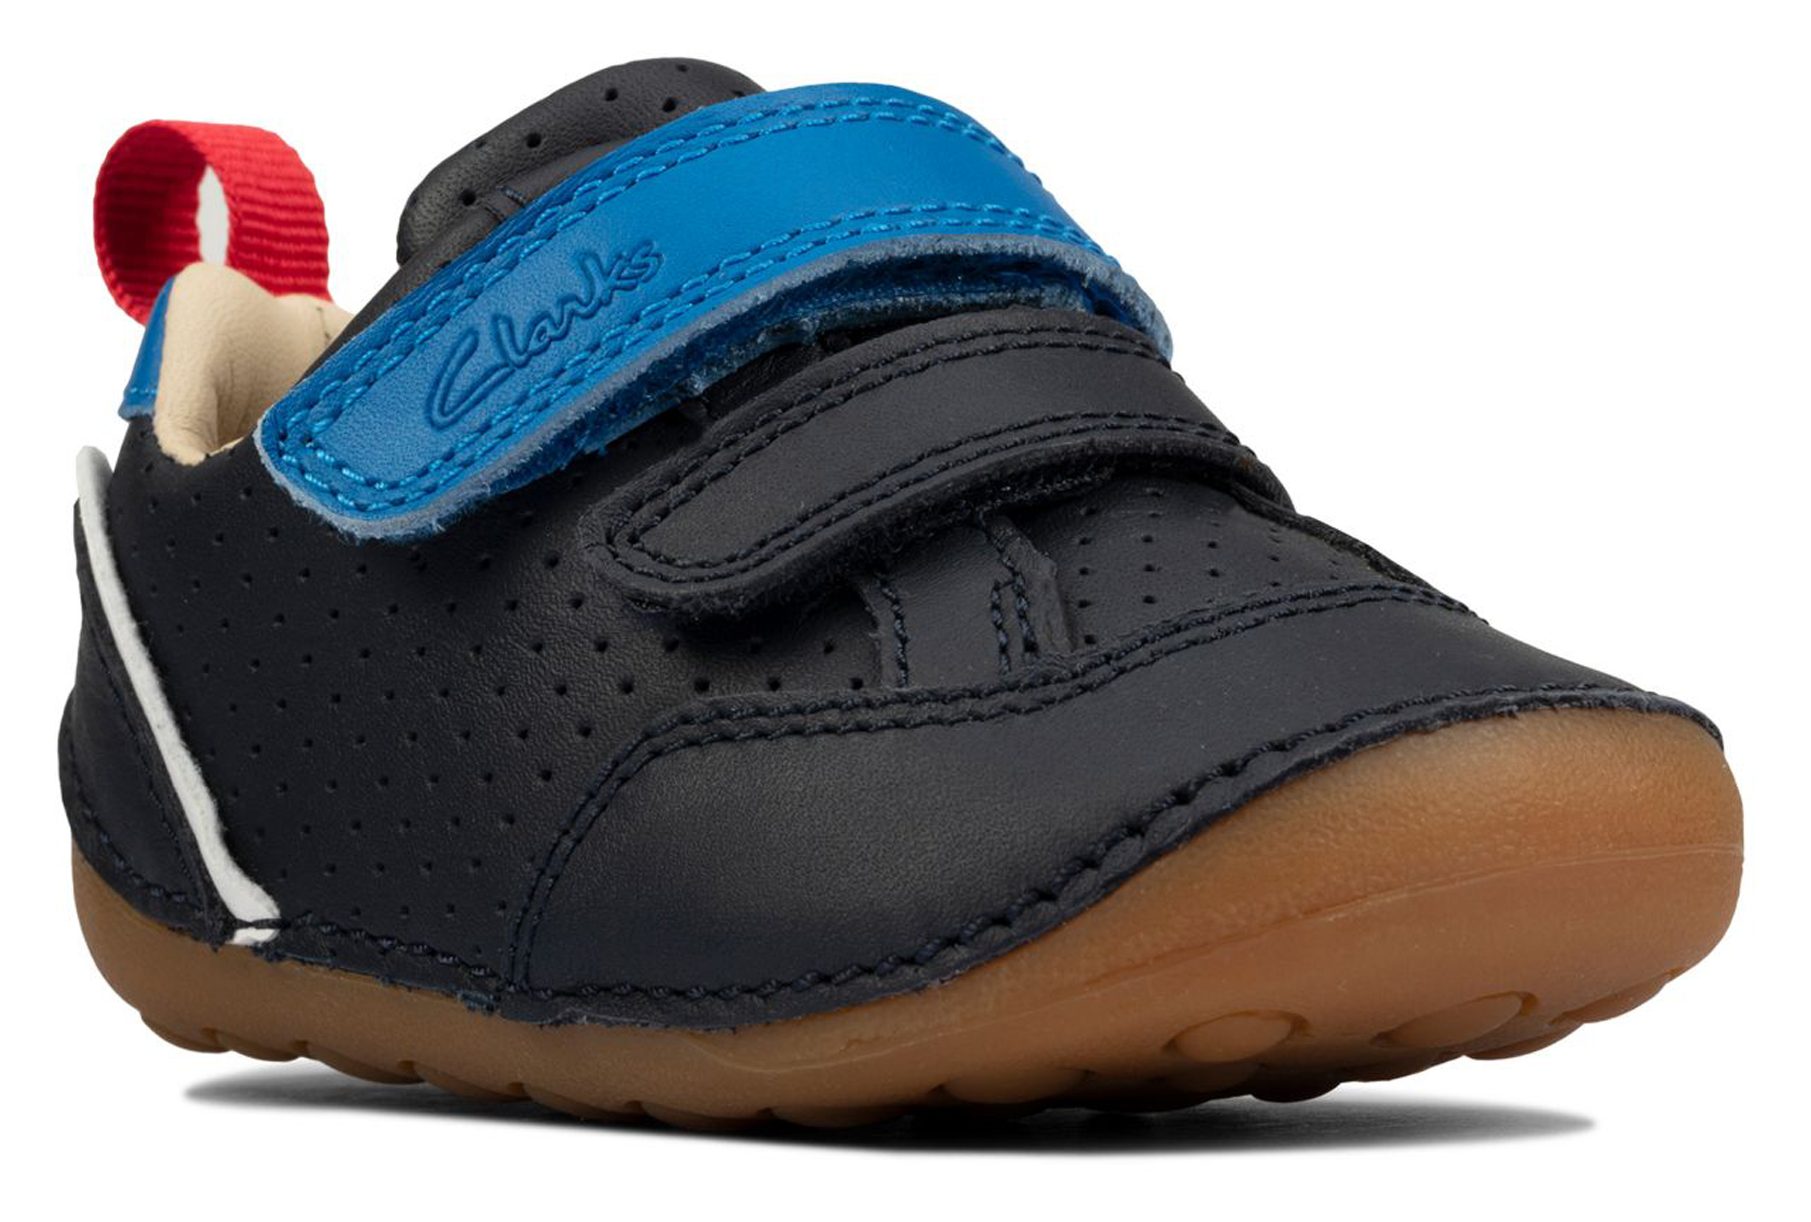 Clarks Tiny Sky Toddler Navy Leather 26157629 - Boys Shoes - Humphries ...